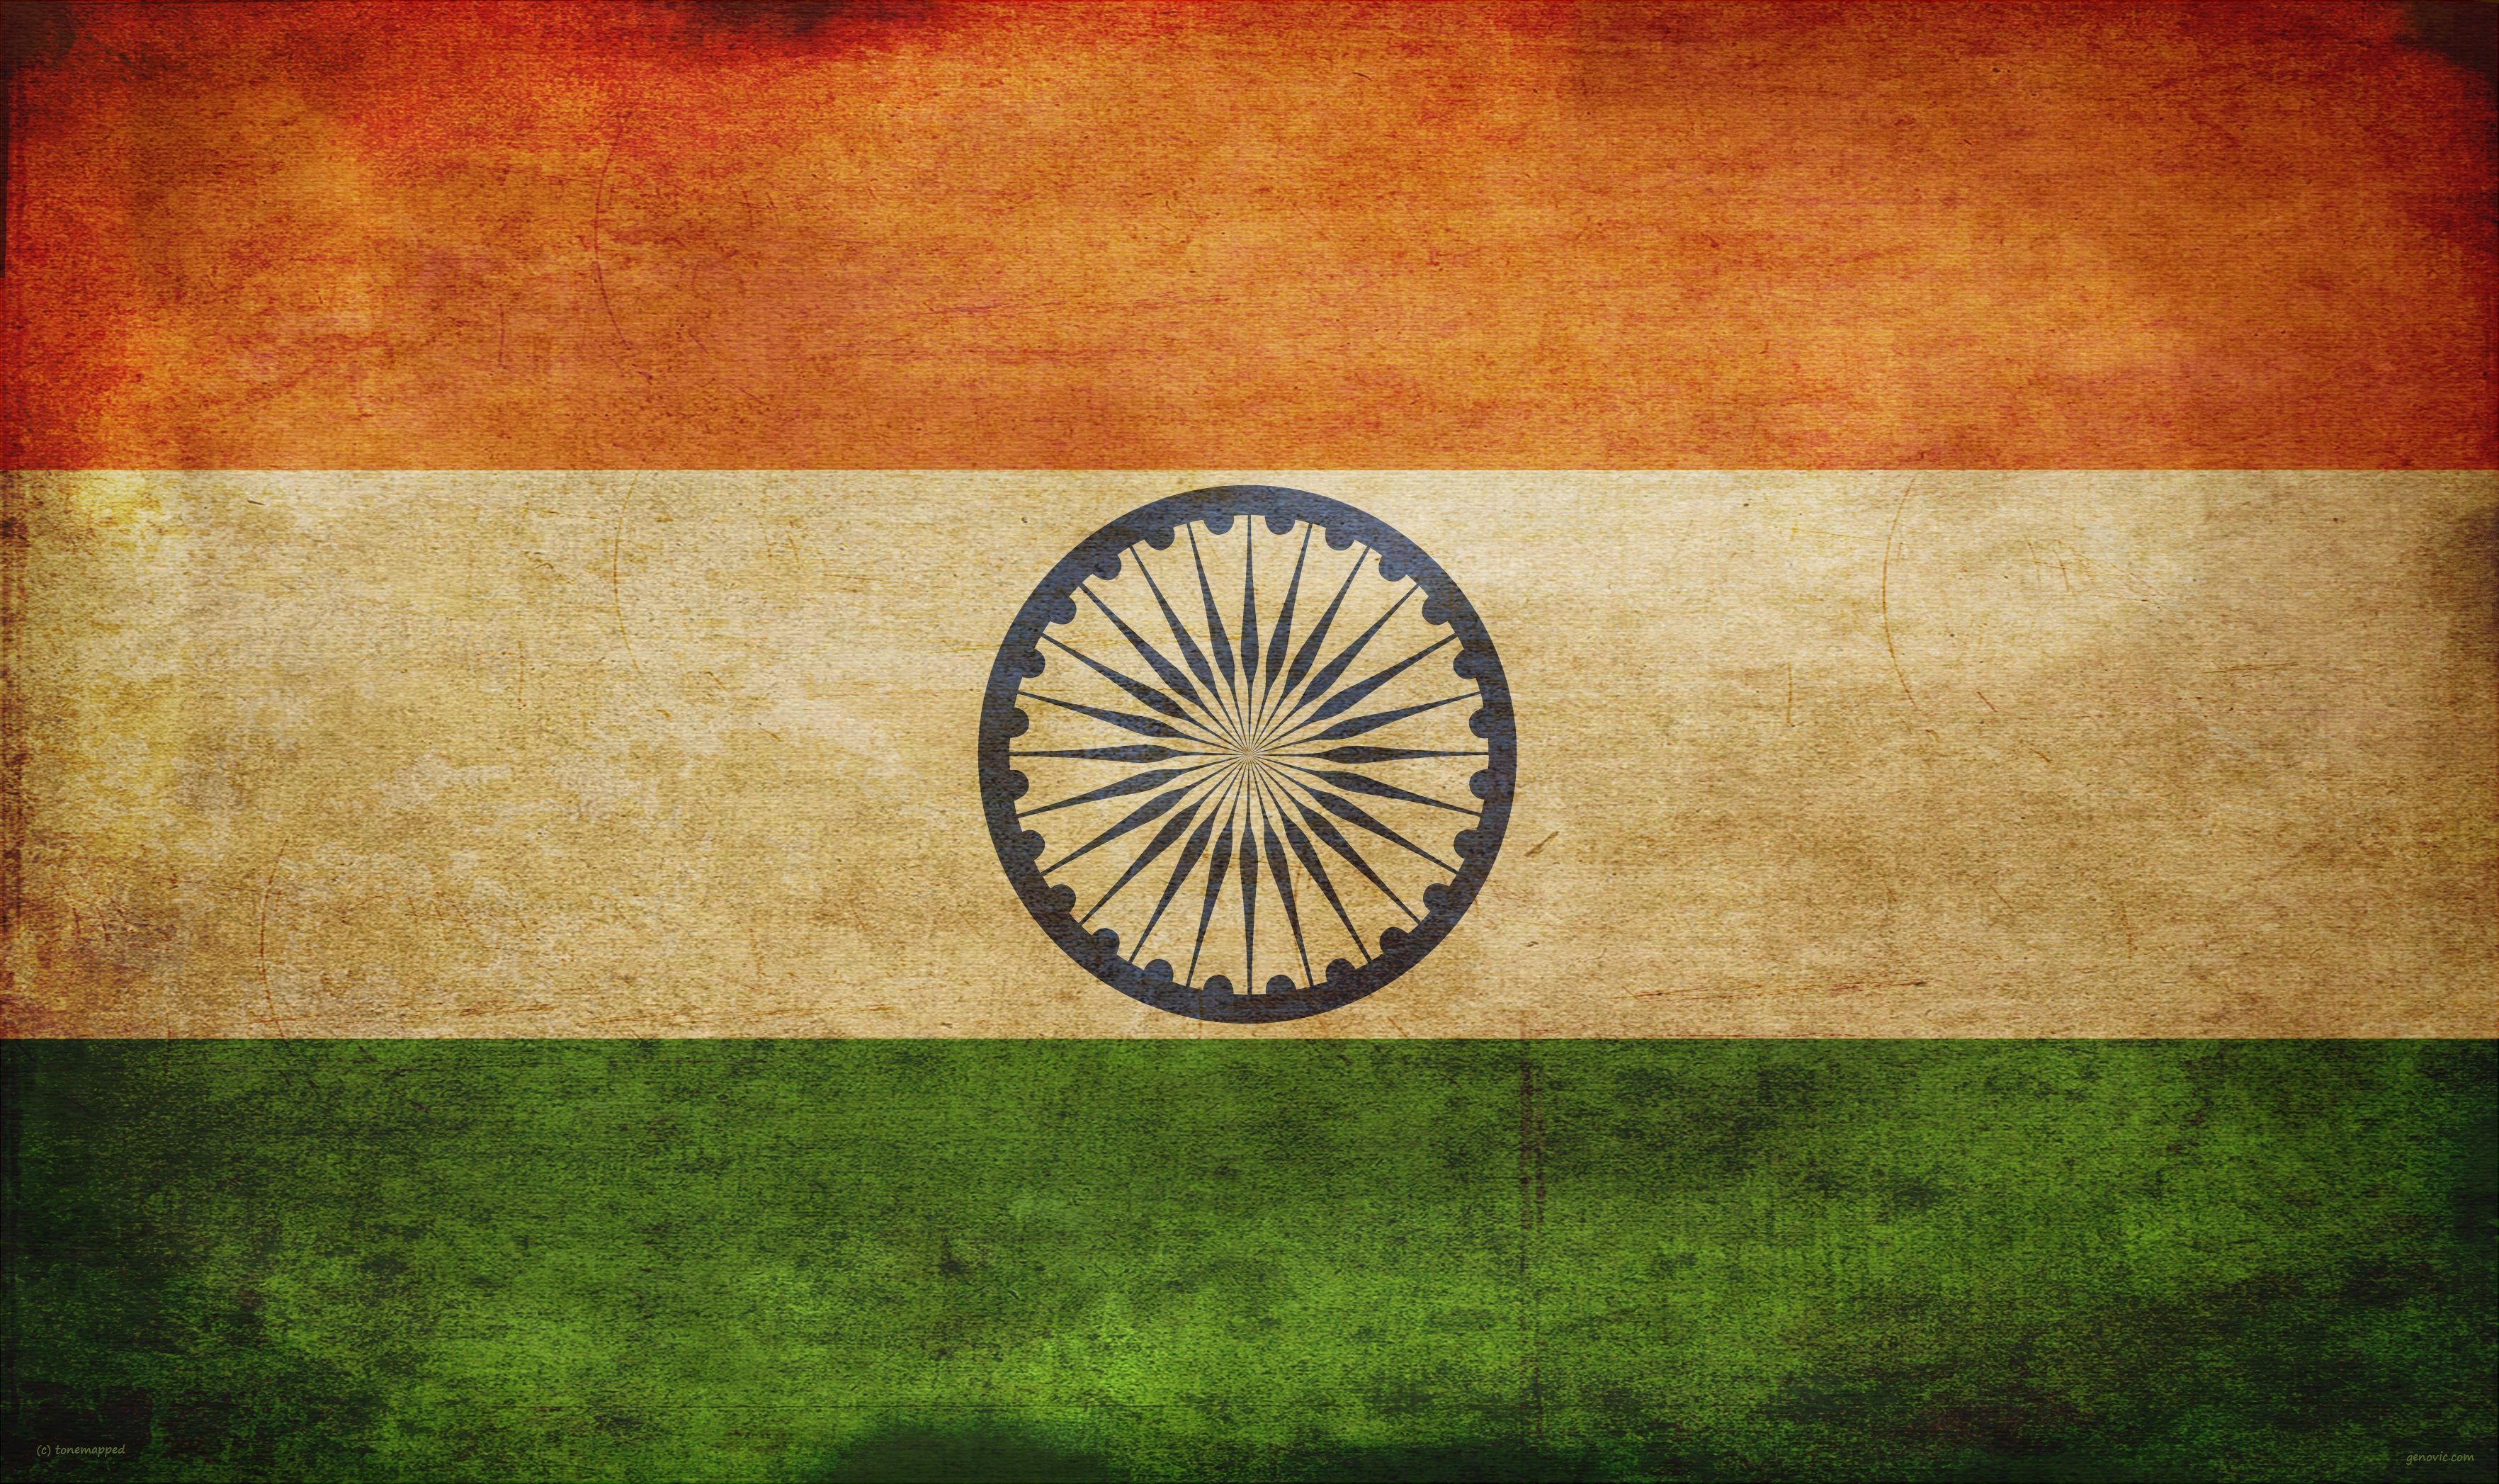 Gallery for - hd wallpapers 1080p national flag